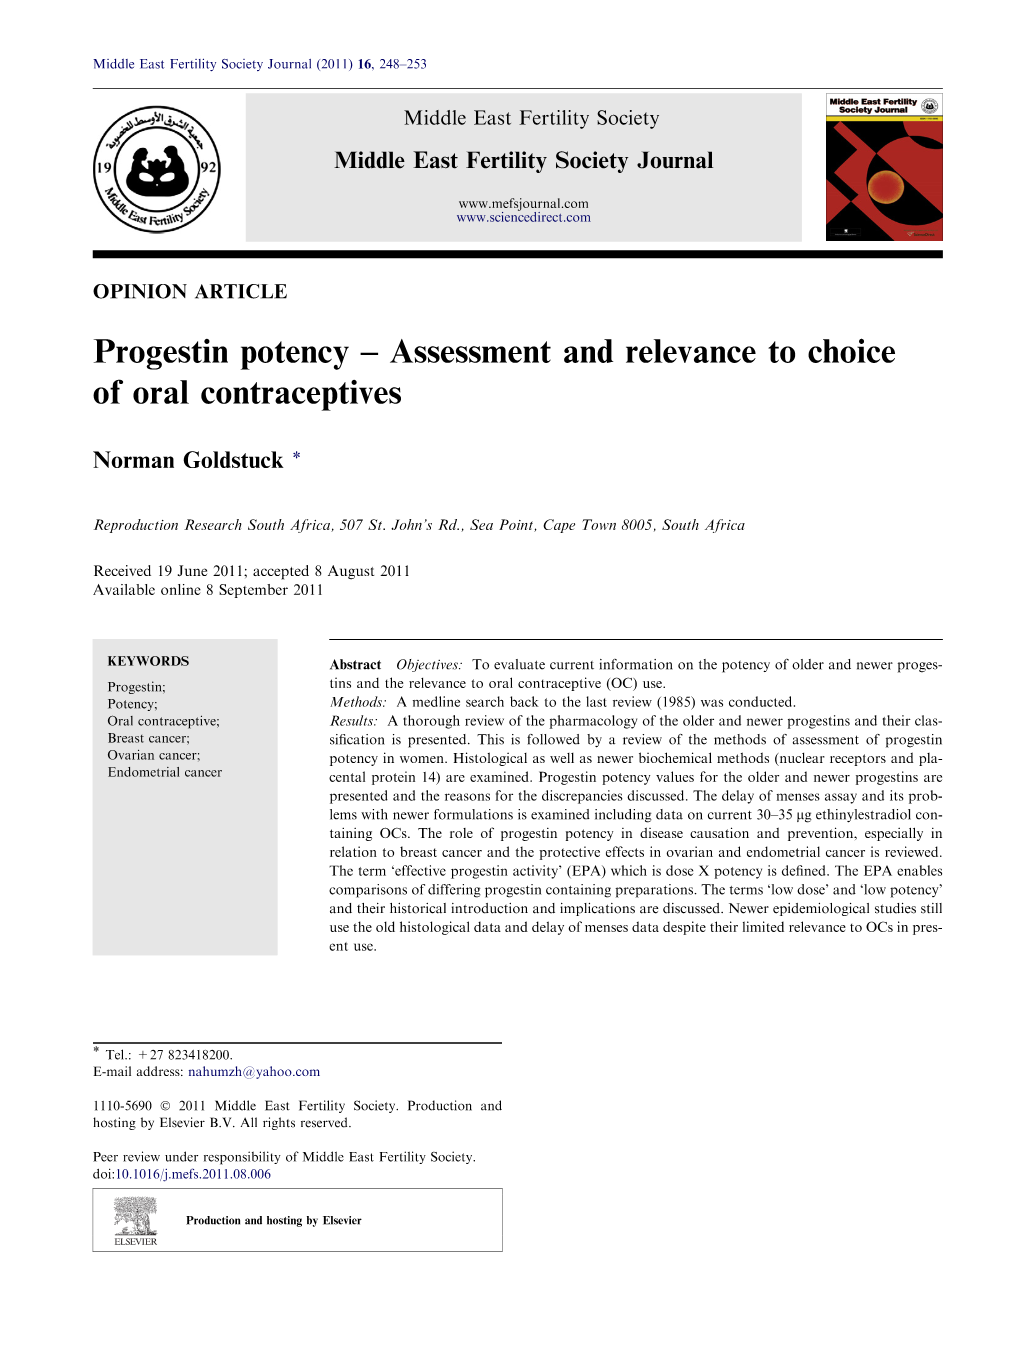 Progestin Potency Â€“ Assessment and Relevance to Choice of Oral